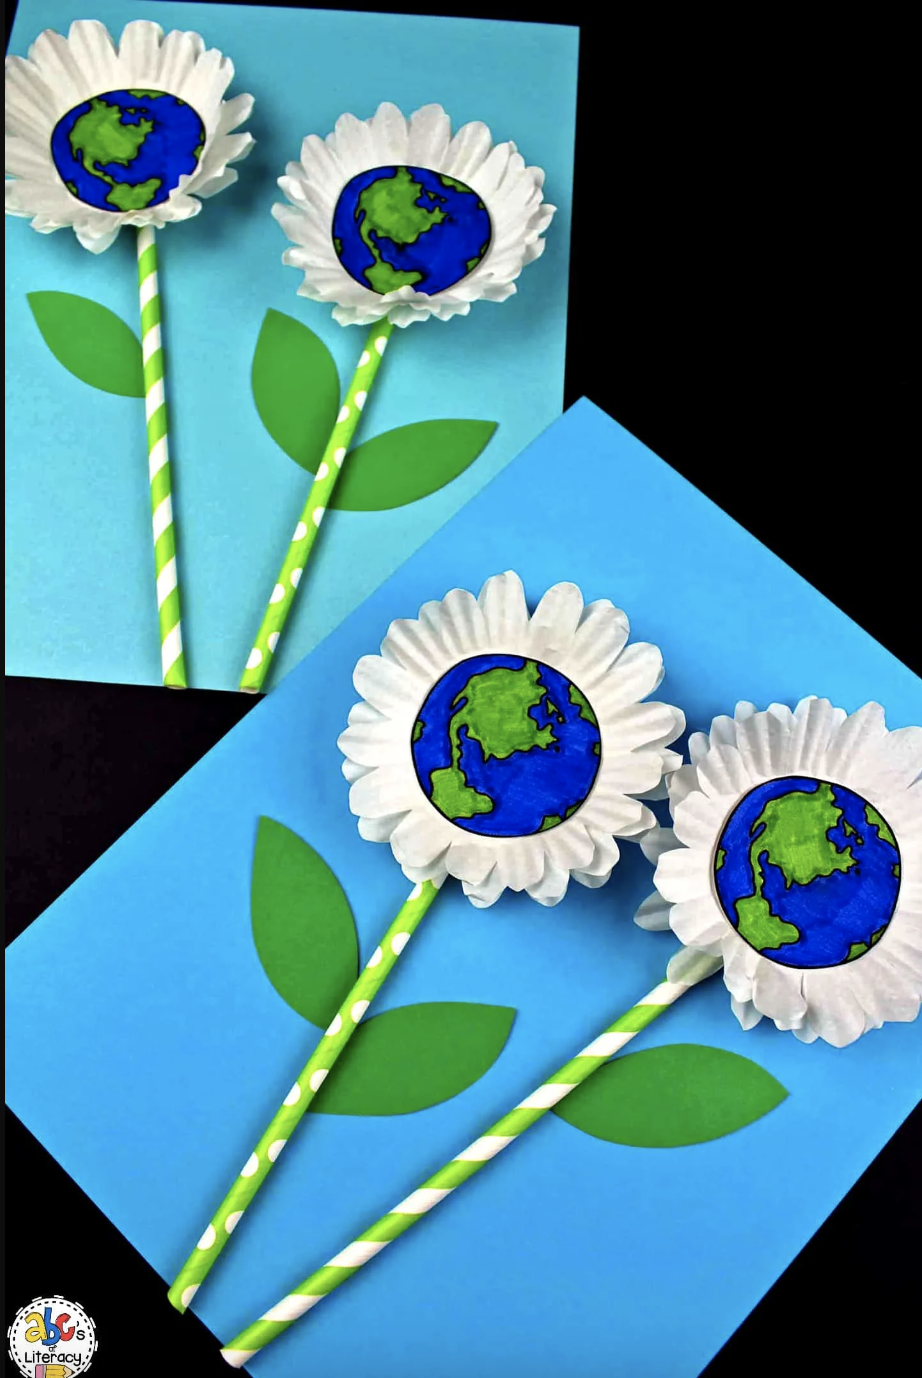 earth day flowers